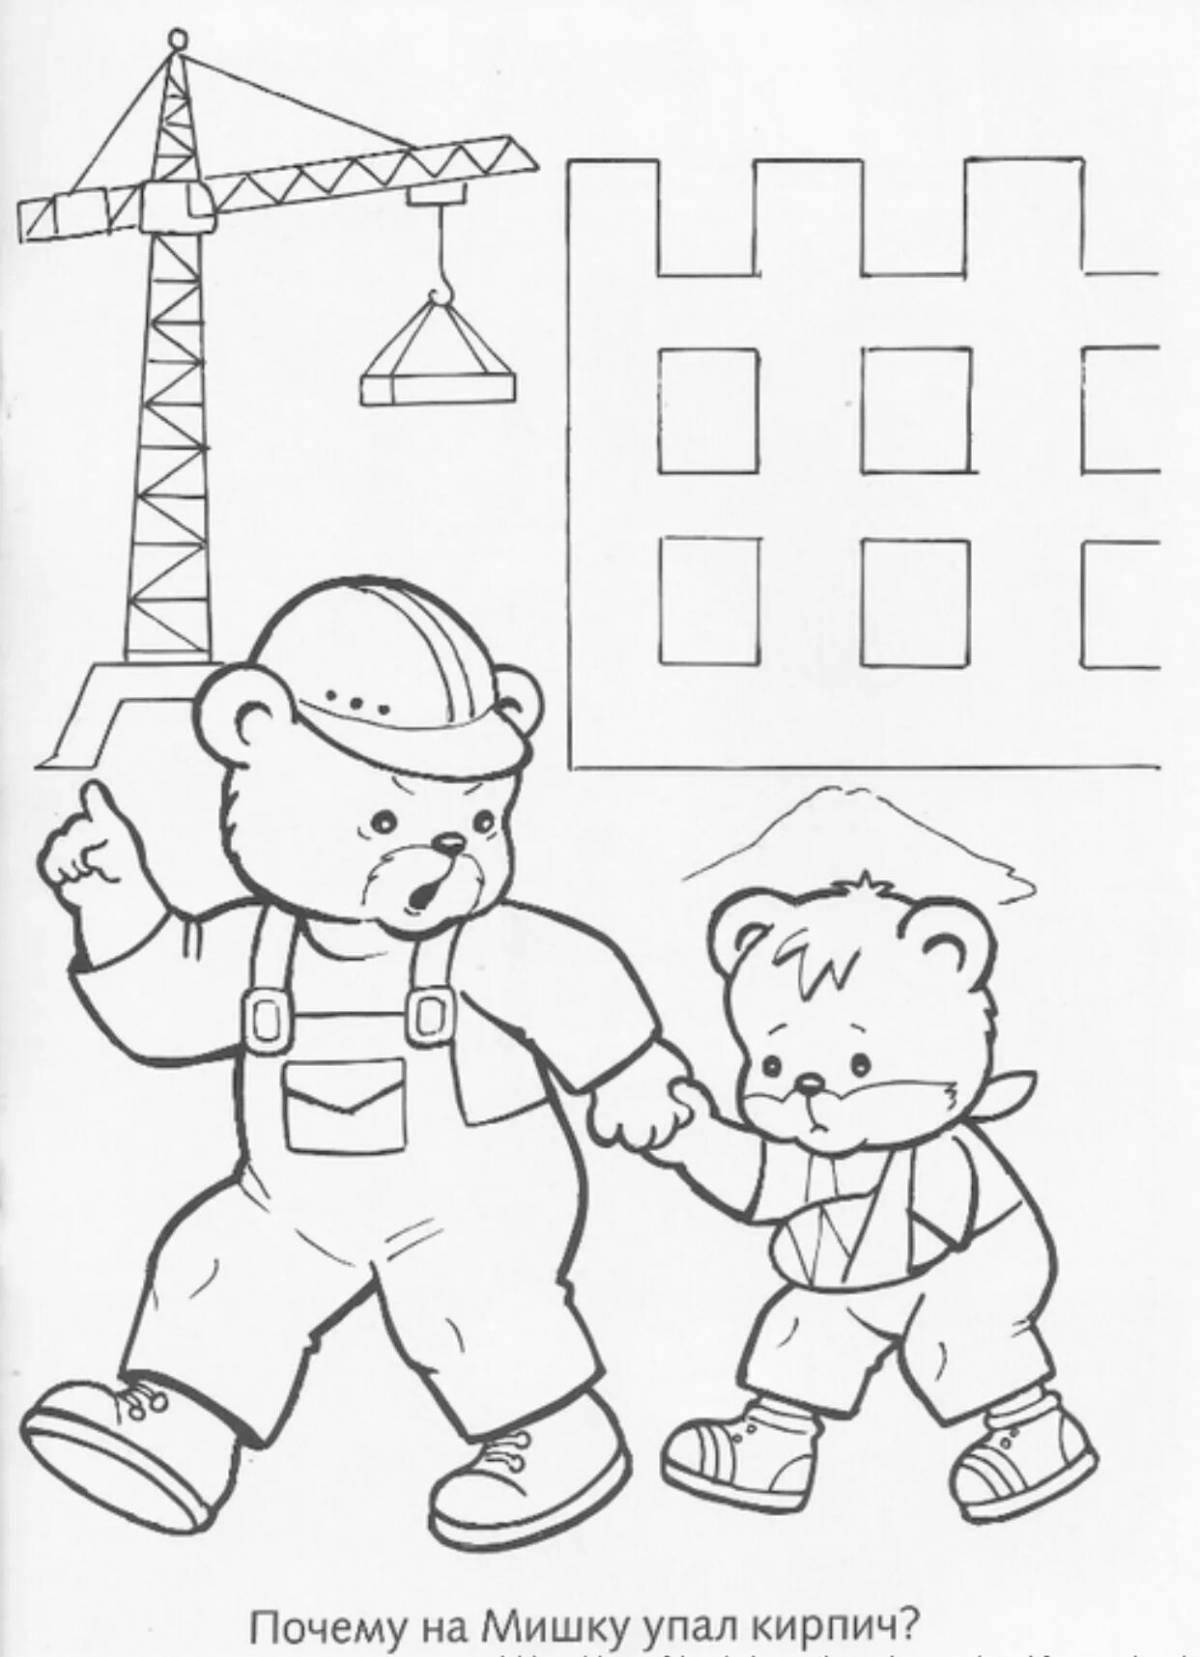 Fun occupational safety coloring book